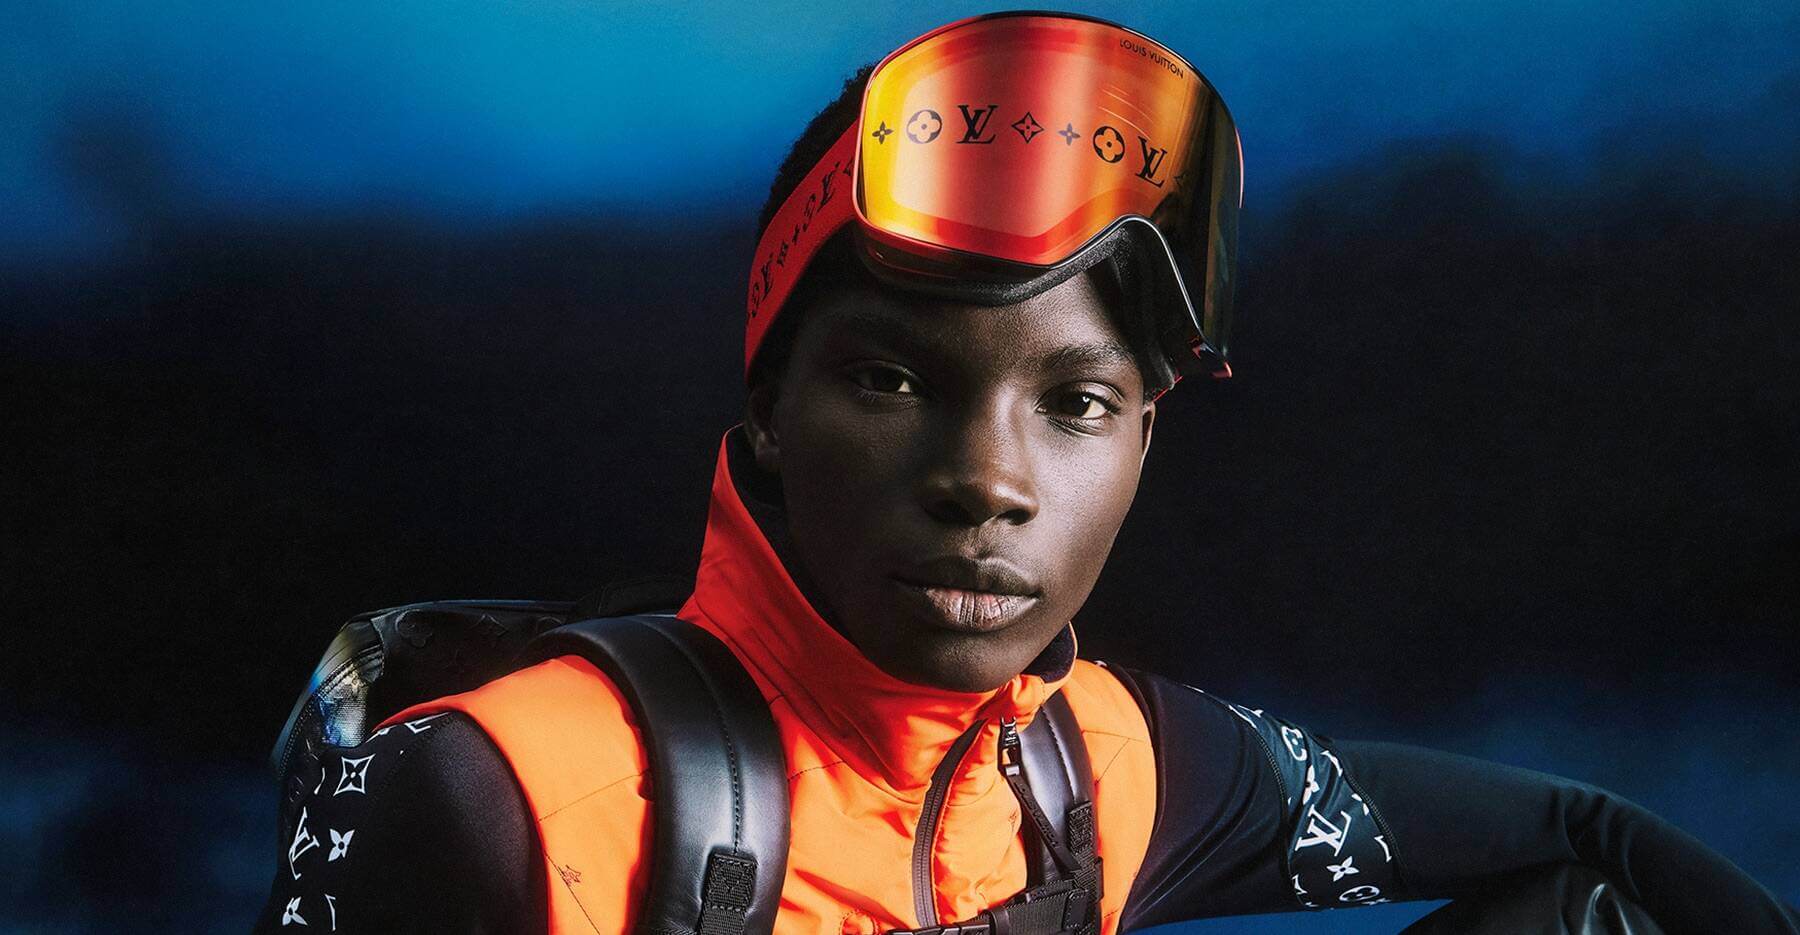 Louis Vuitton Hits The Slopes With New Skiwear Capsule - 10 Magazine